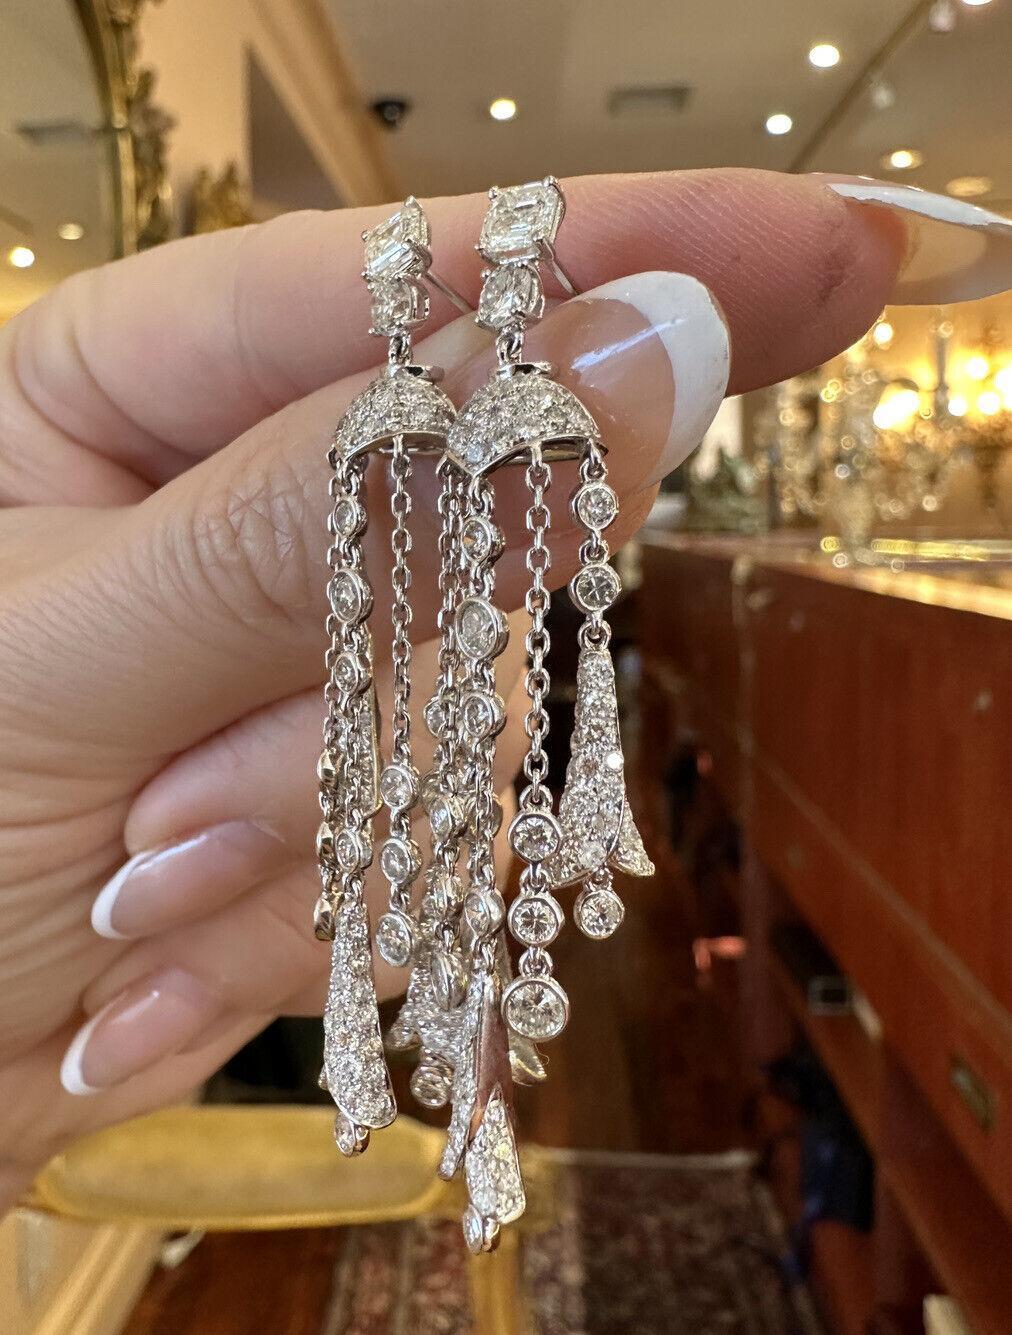 Diamond Chandelier Drop Earrings 5.25 Carat Total Weight in 18k White Gold In Excellent Condition For Sale In La Jolla, CA